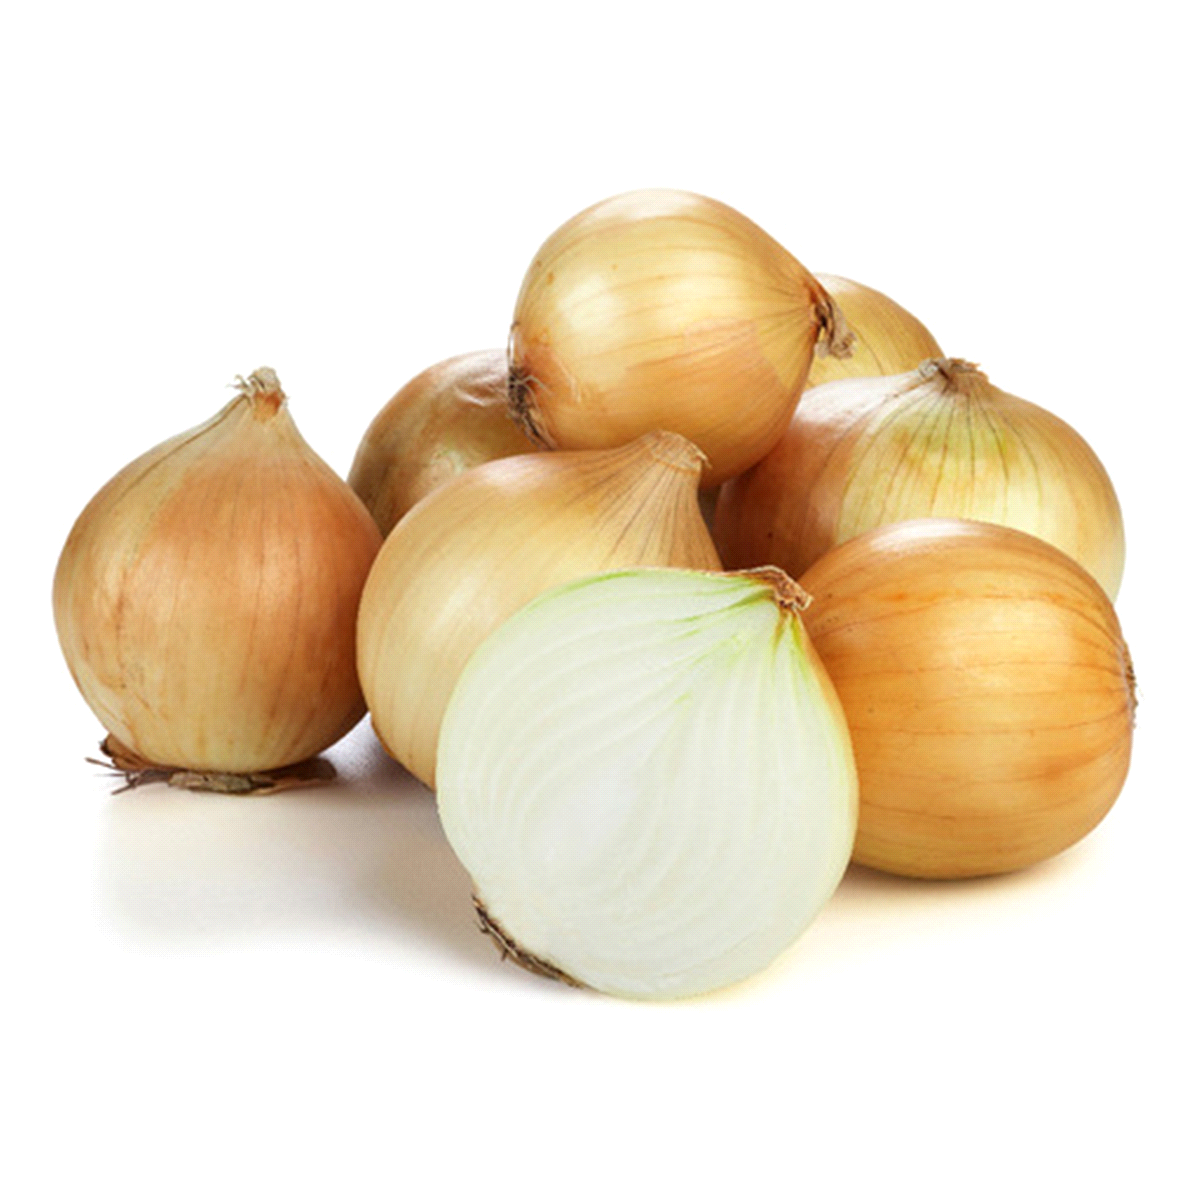 Yellow onions become sweet when sautéed. 